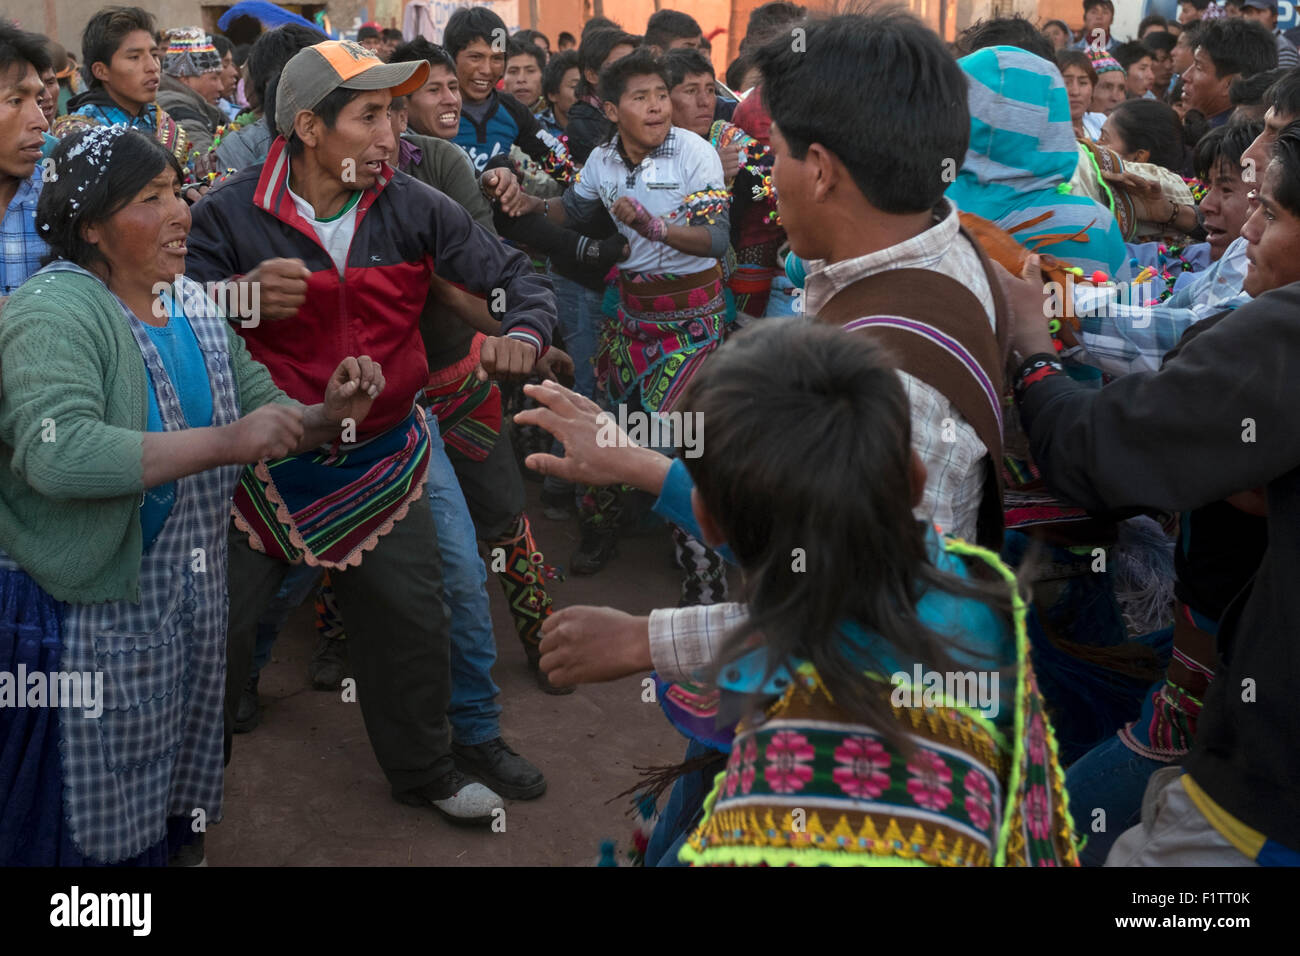 During the celebration of Tinku, several people confronting each other just before starting to fight. Stock Photo